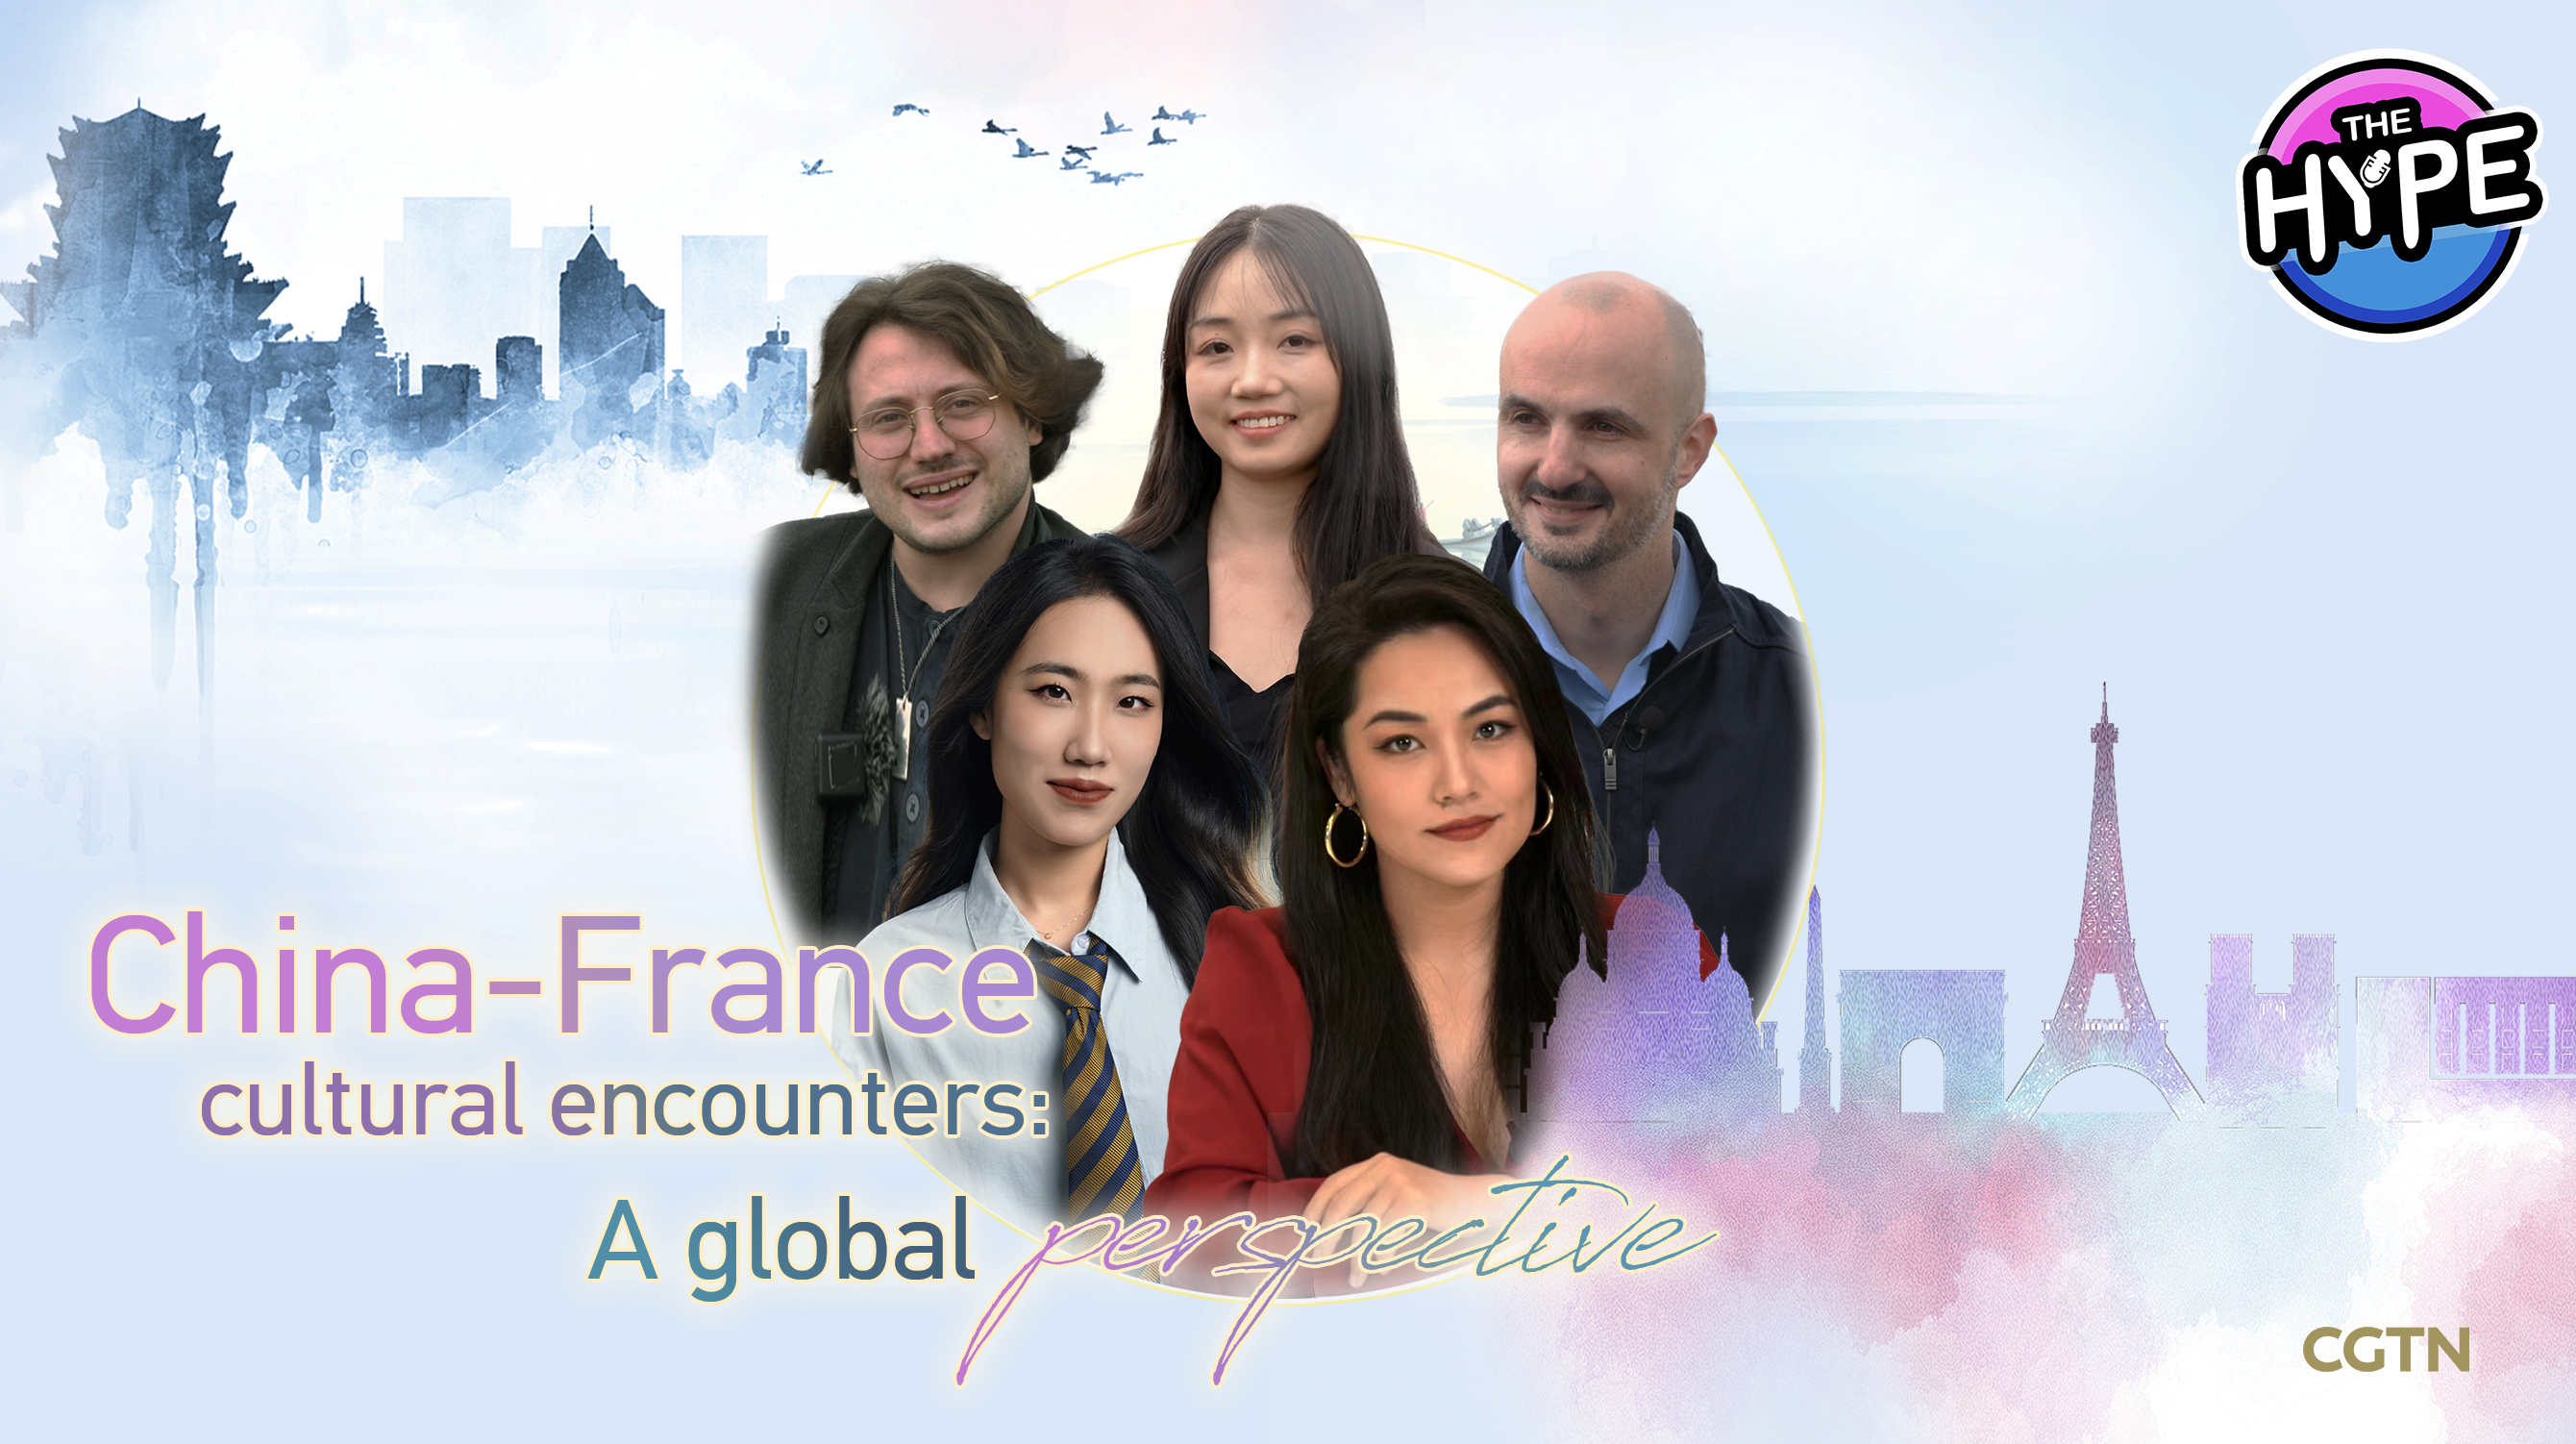 Watch: THE HYPE – China-France cultural encounters